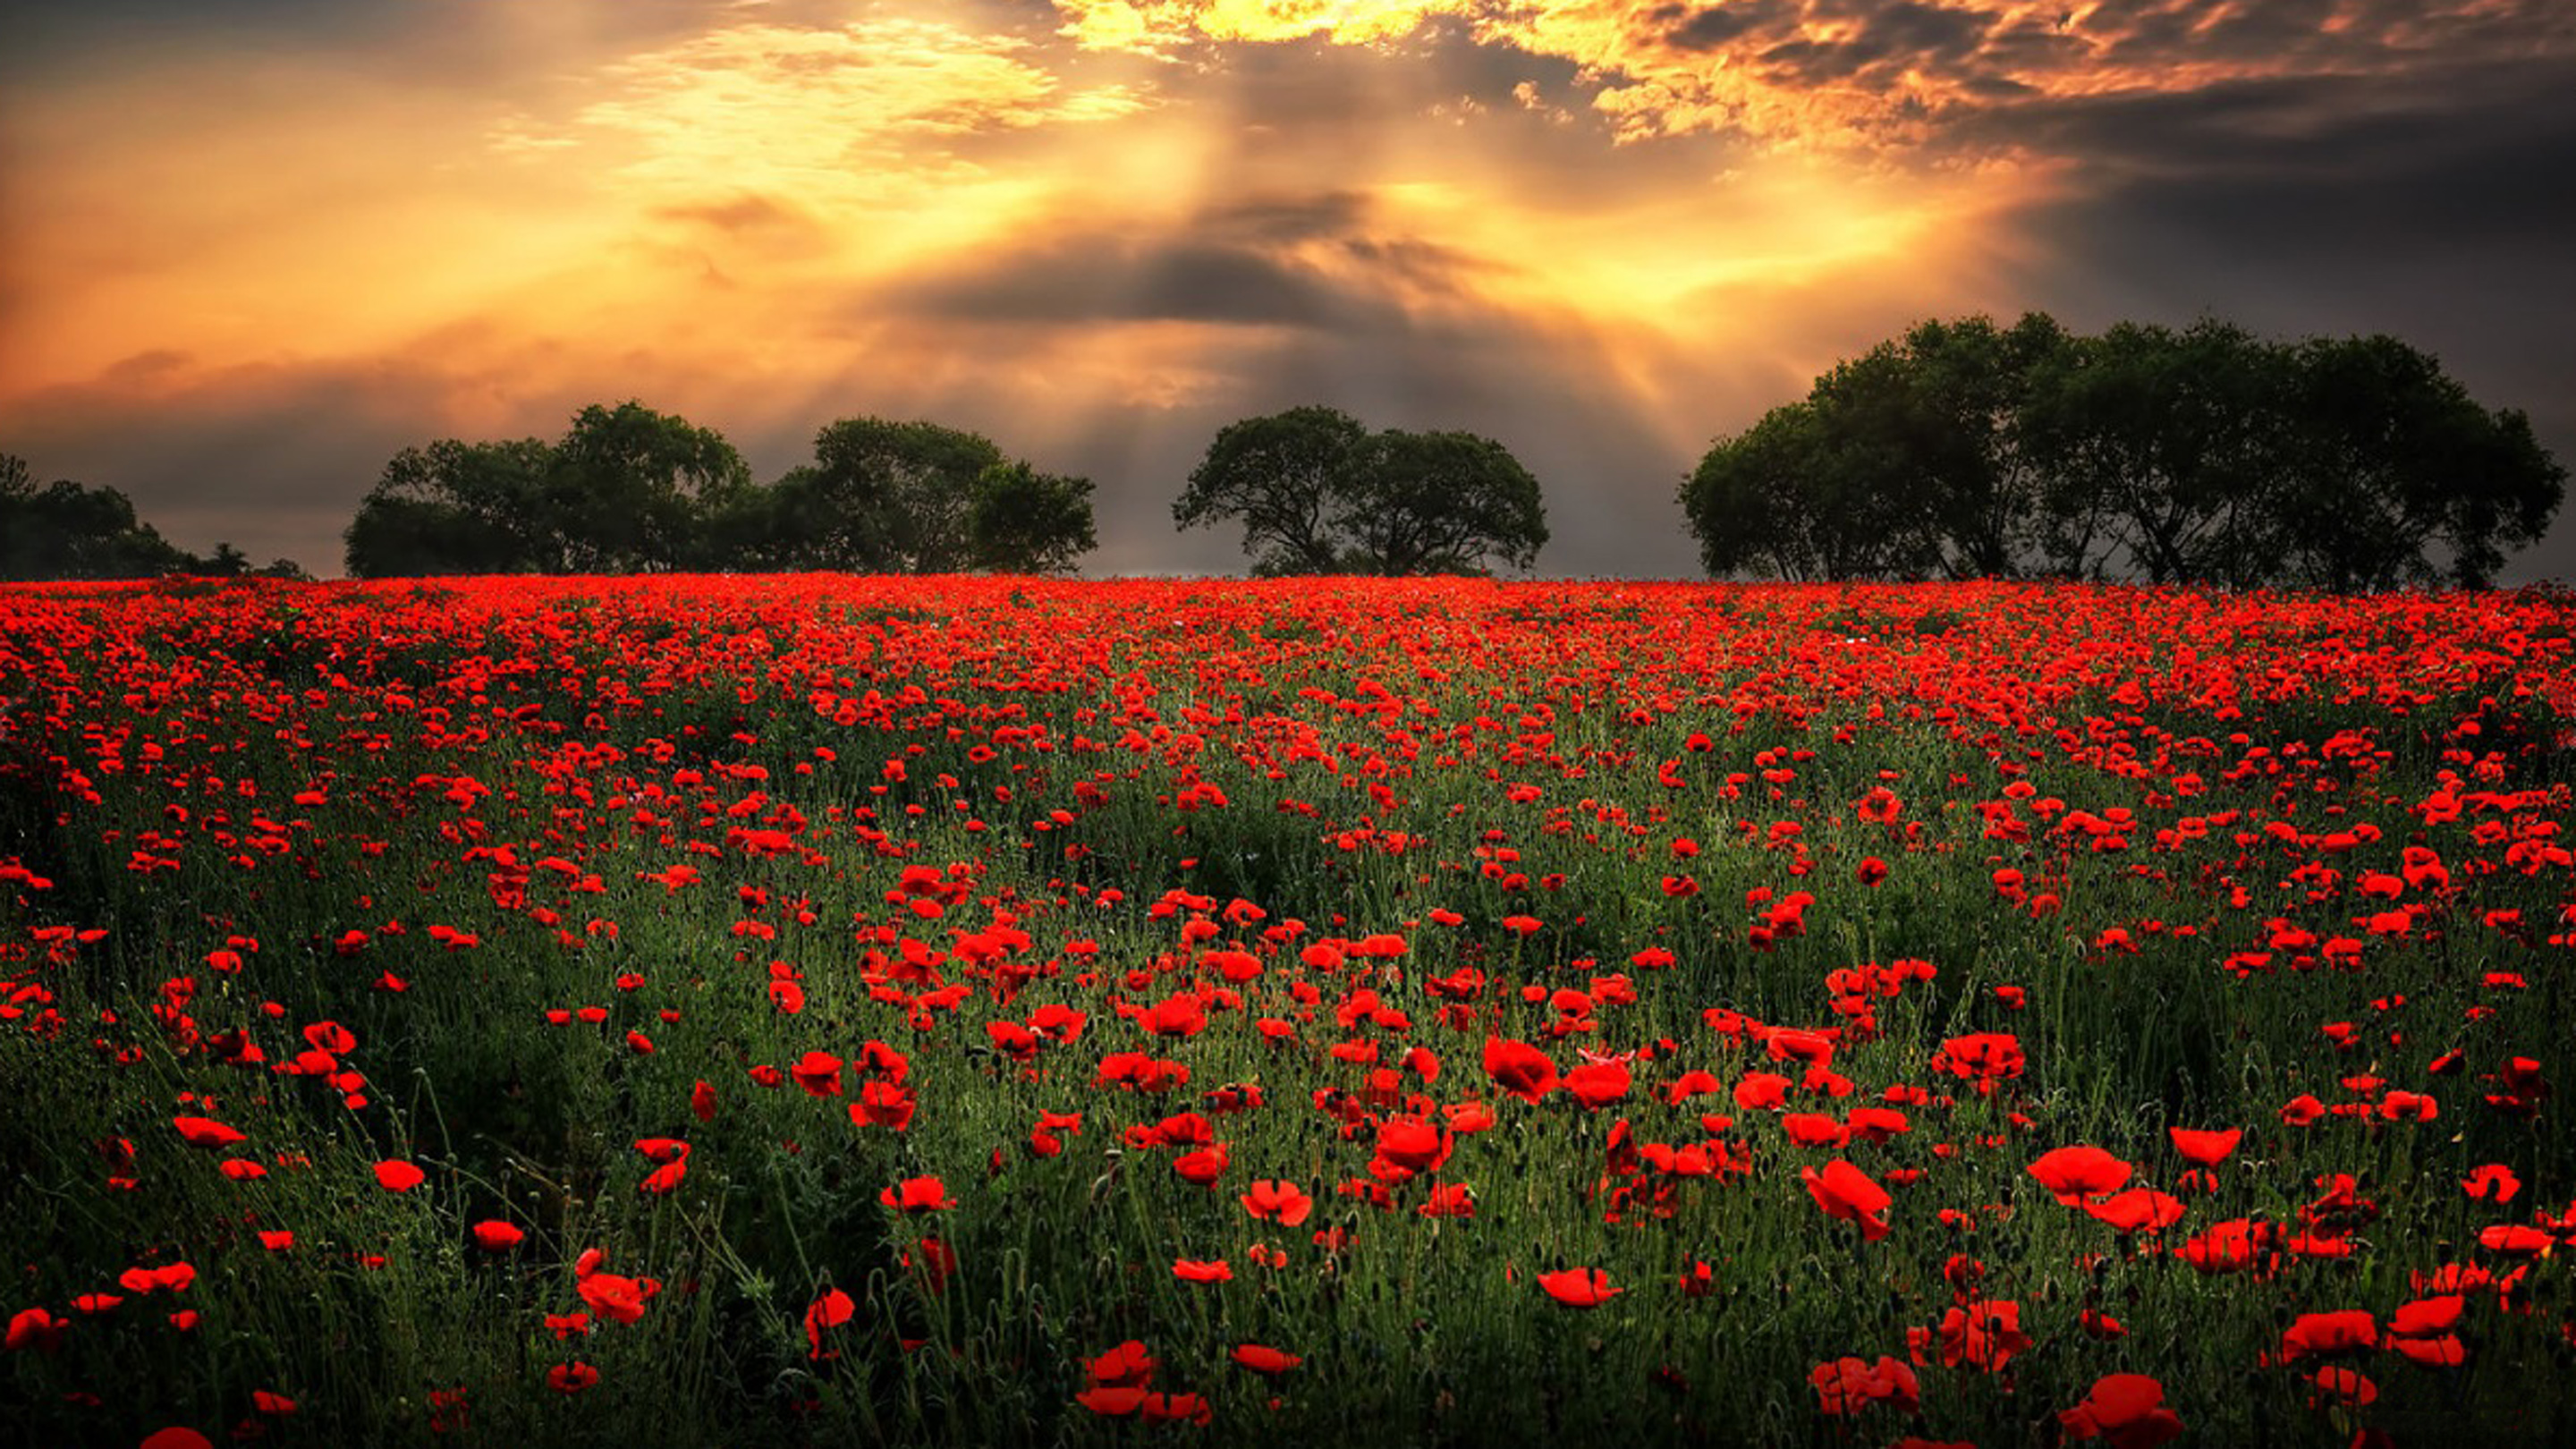 Amazing Sky over Poppy Field HD Wallpaper | Background Image